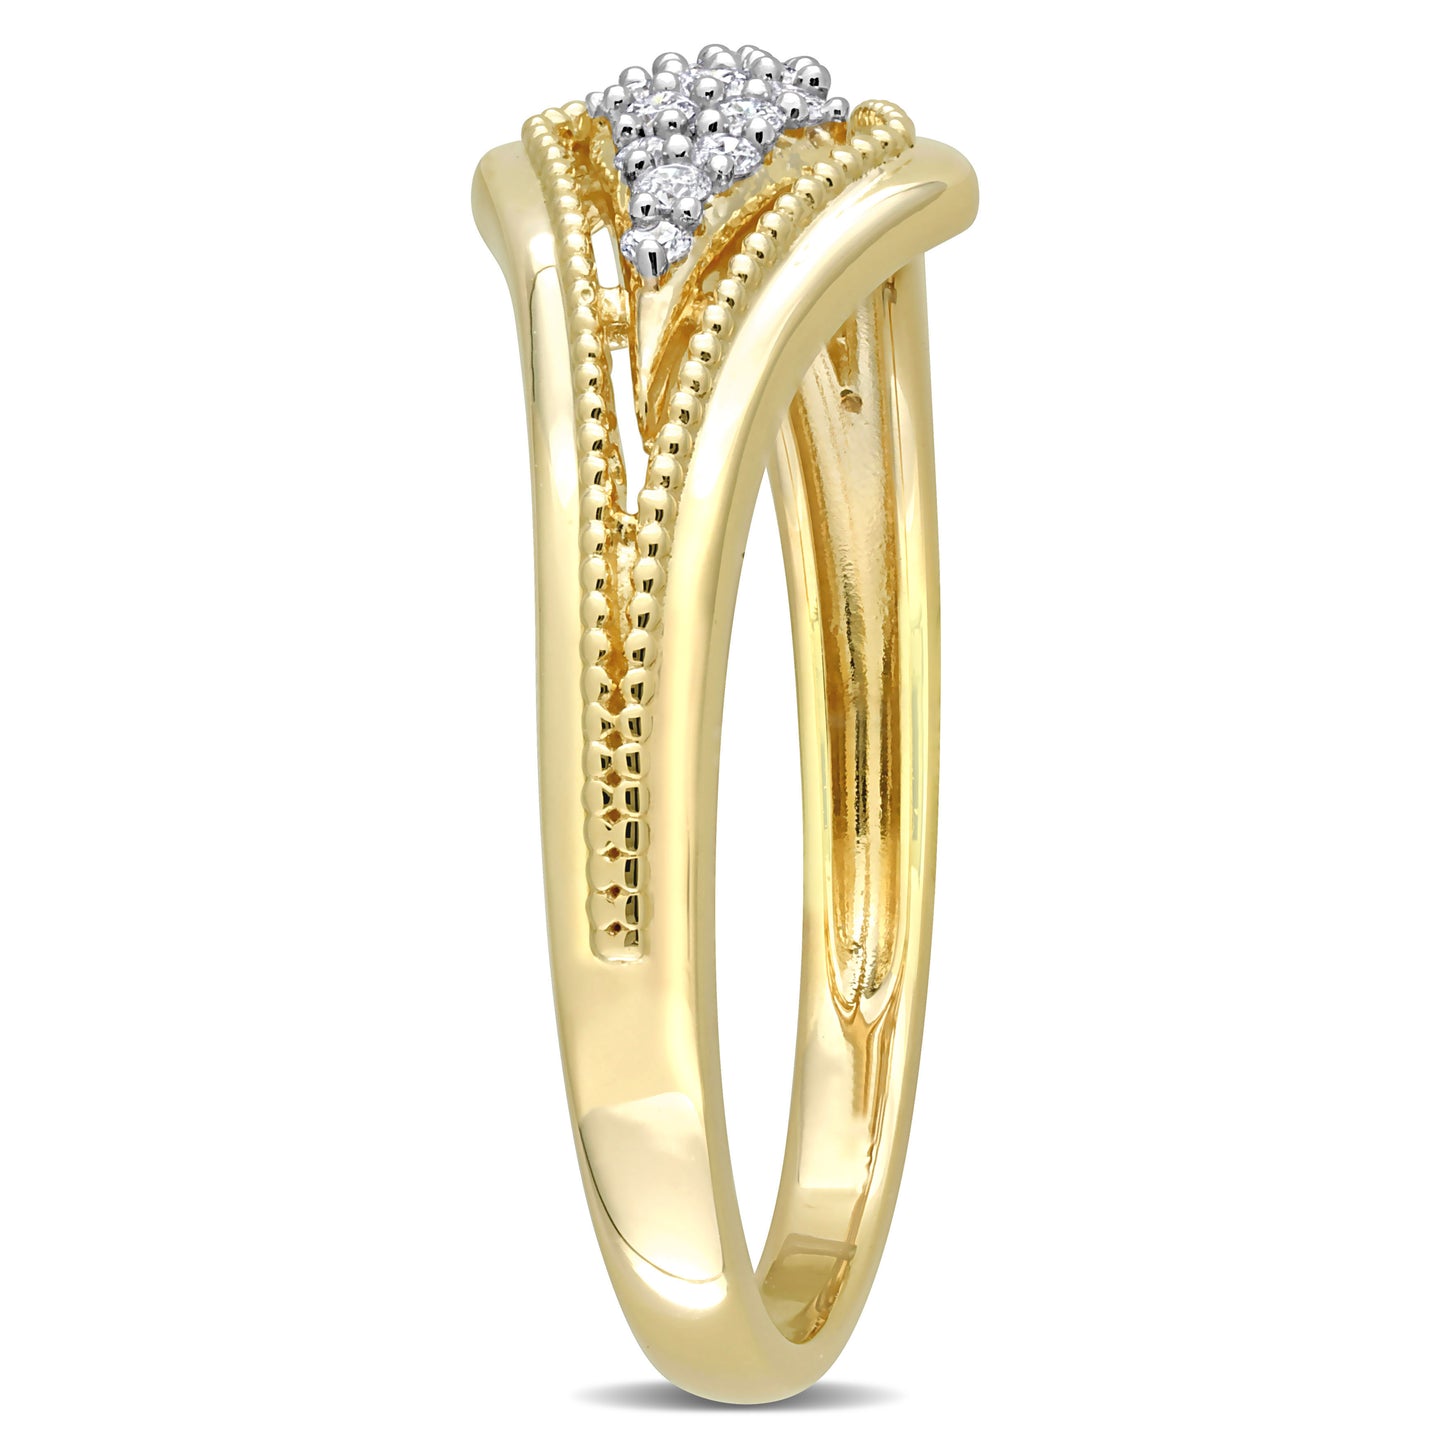 Pave Diamond Ring in 10k Yellow Gold